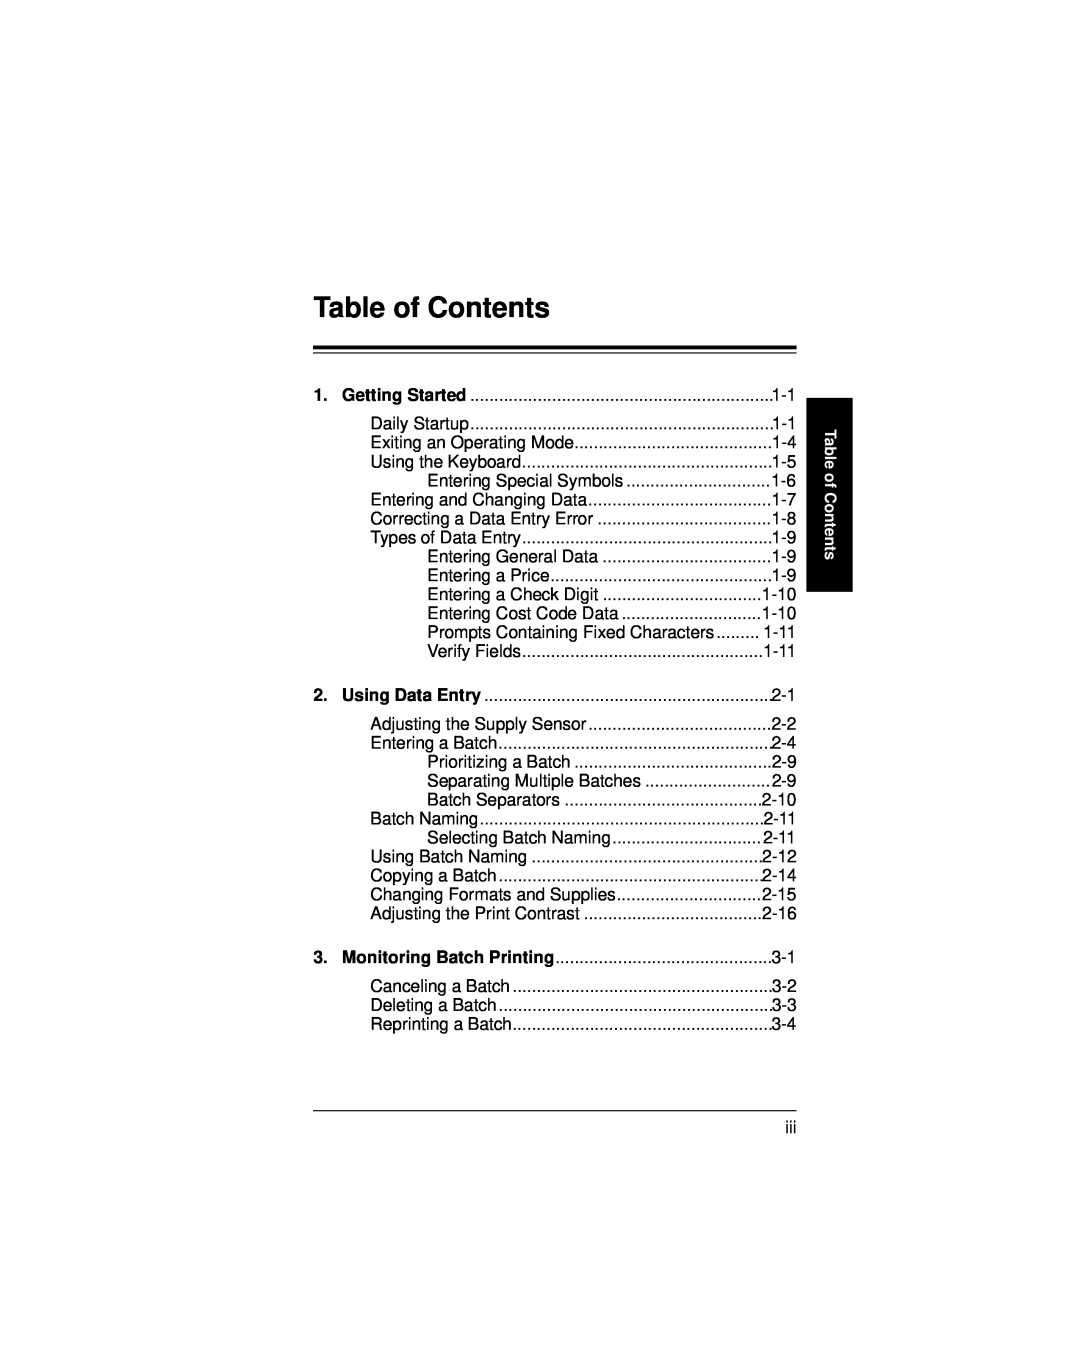 Paxar 9400 manual Table of Contents, Entering Cost Code Data, Prompts Containing Fixed Characters, Copying a Batch 